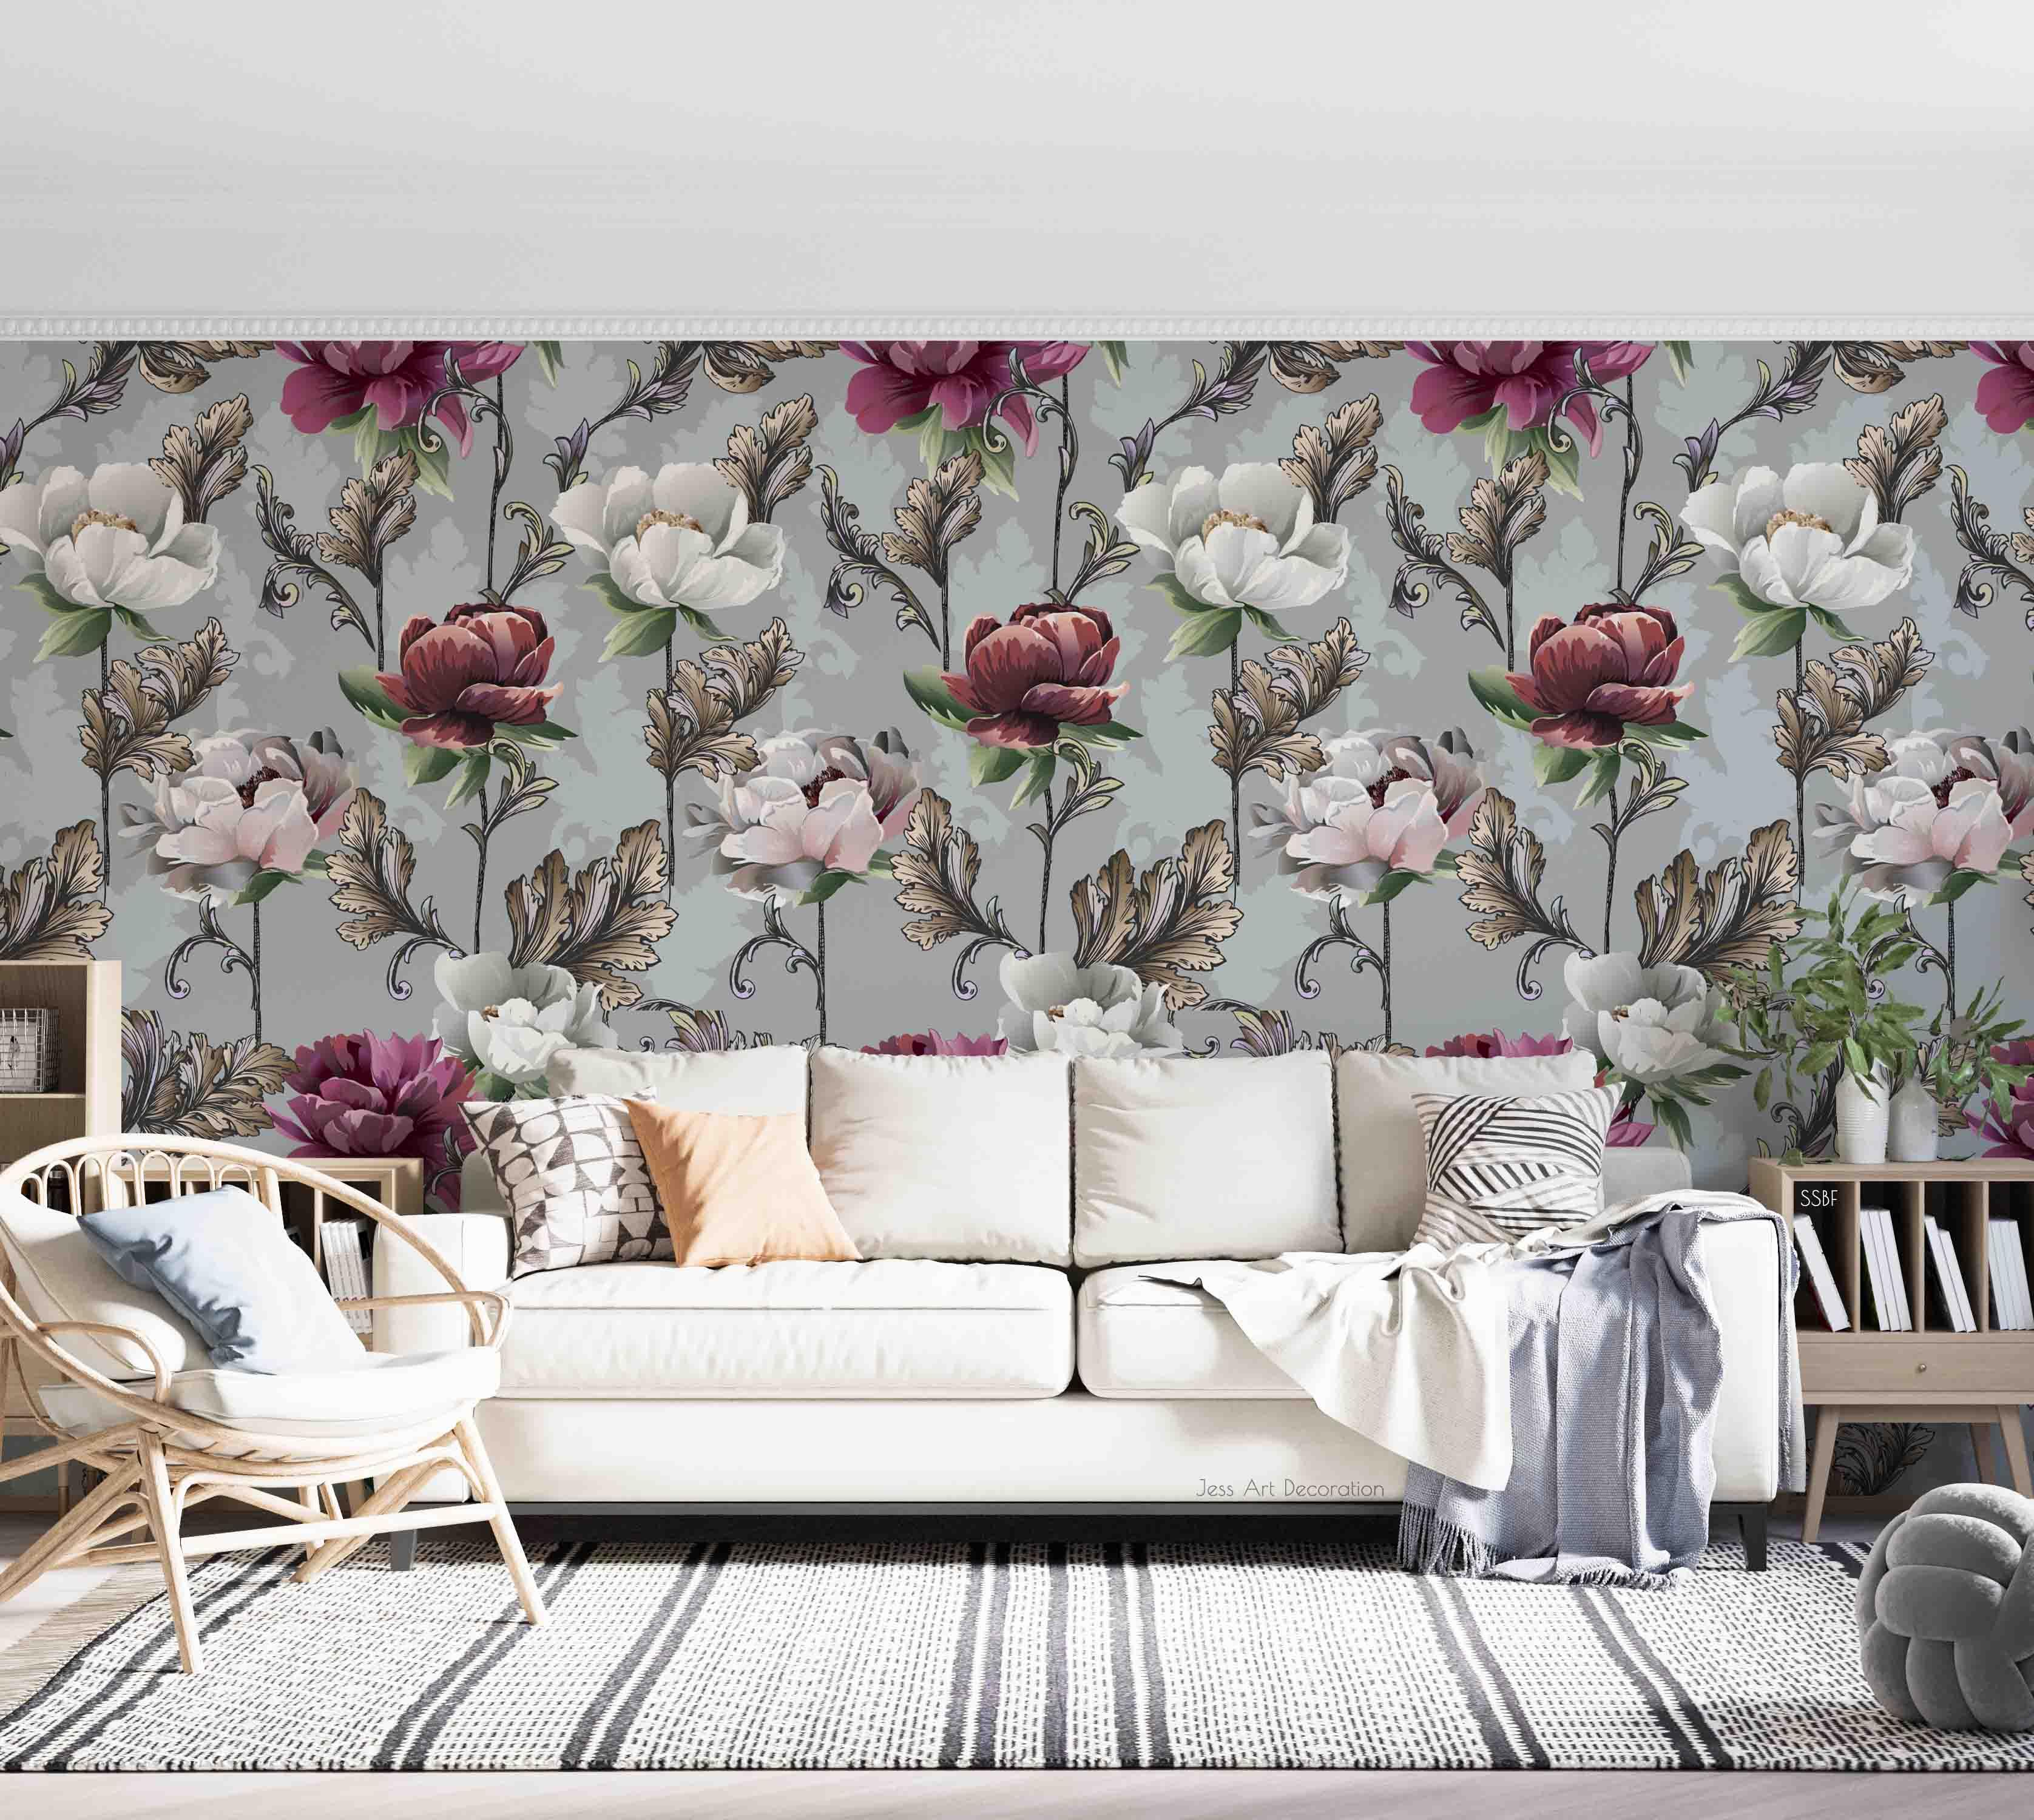 3D Vintage Blooming Pink Flowers Leaves Pattern Wall Mural Wallpaper GD 3530- Jess Art Decoration